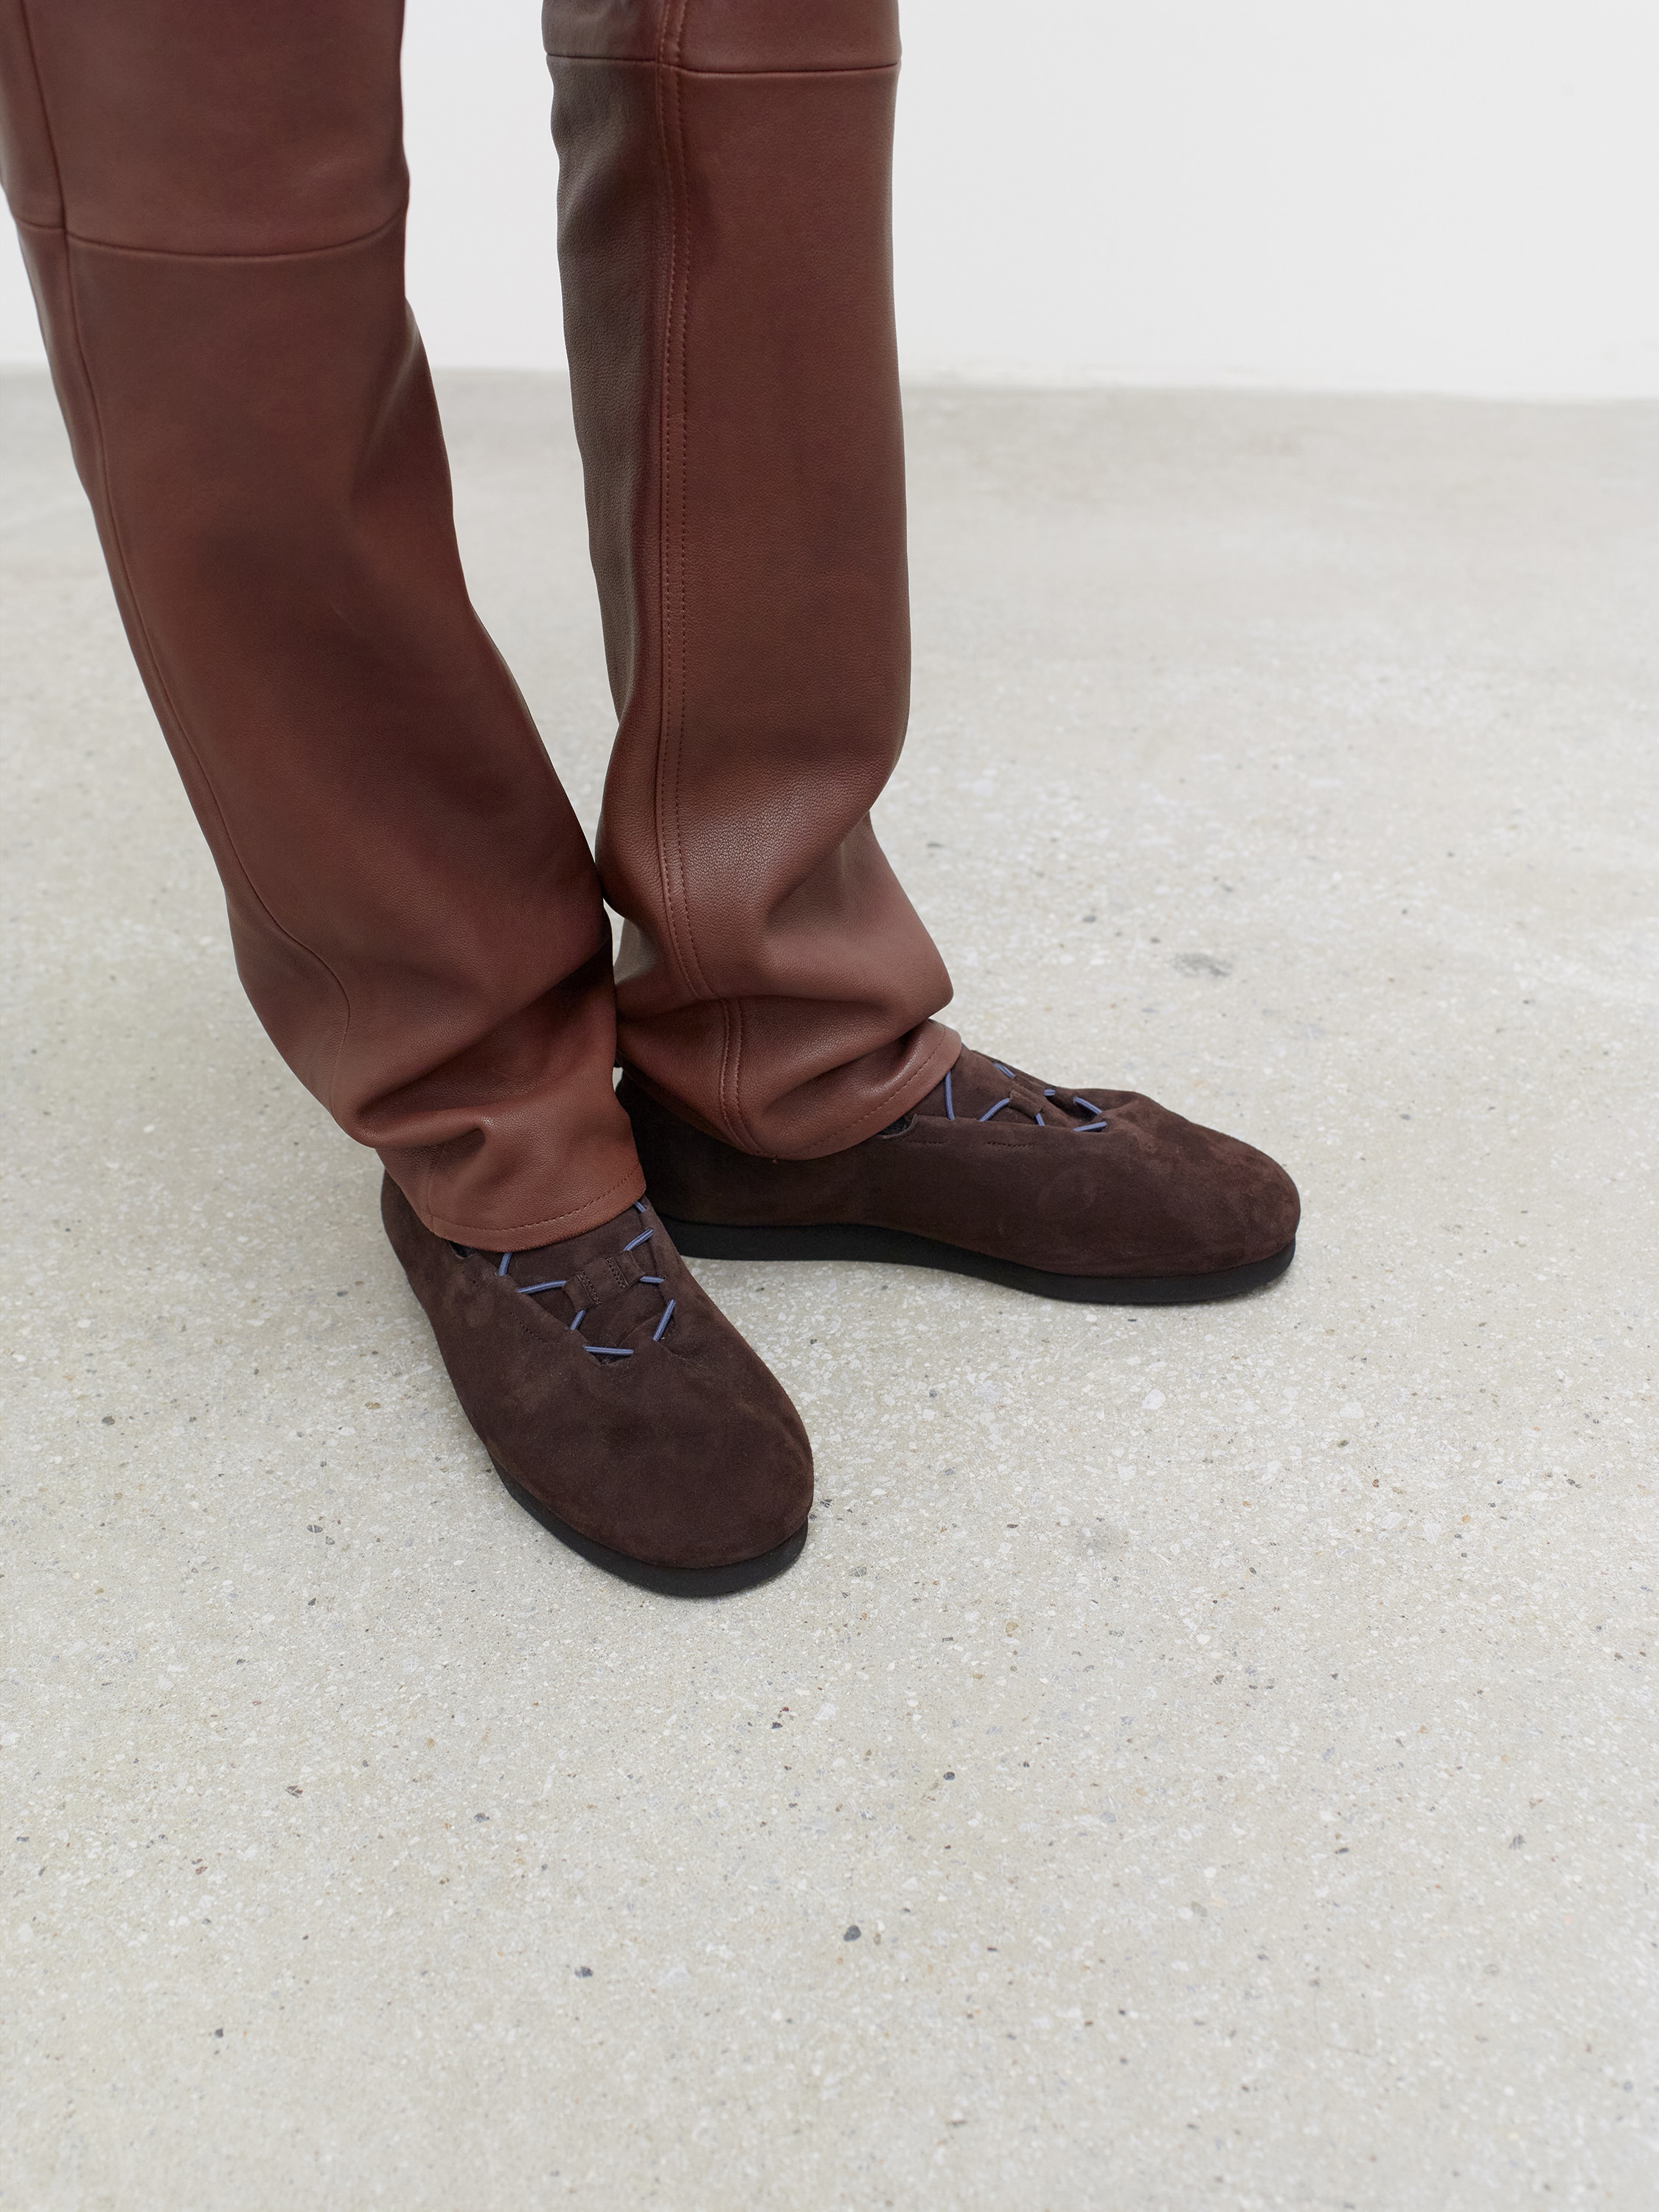 LAMB SUEDE CORD SHOES MADE BY FOOT THE COACHER 詳細画像 DARK BROWN 1